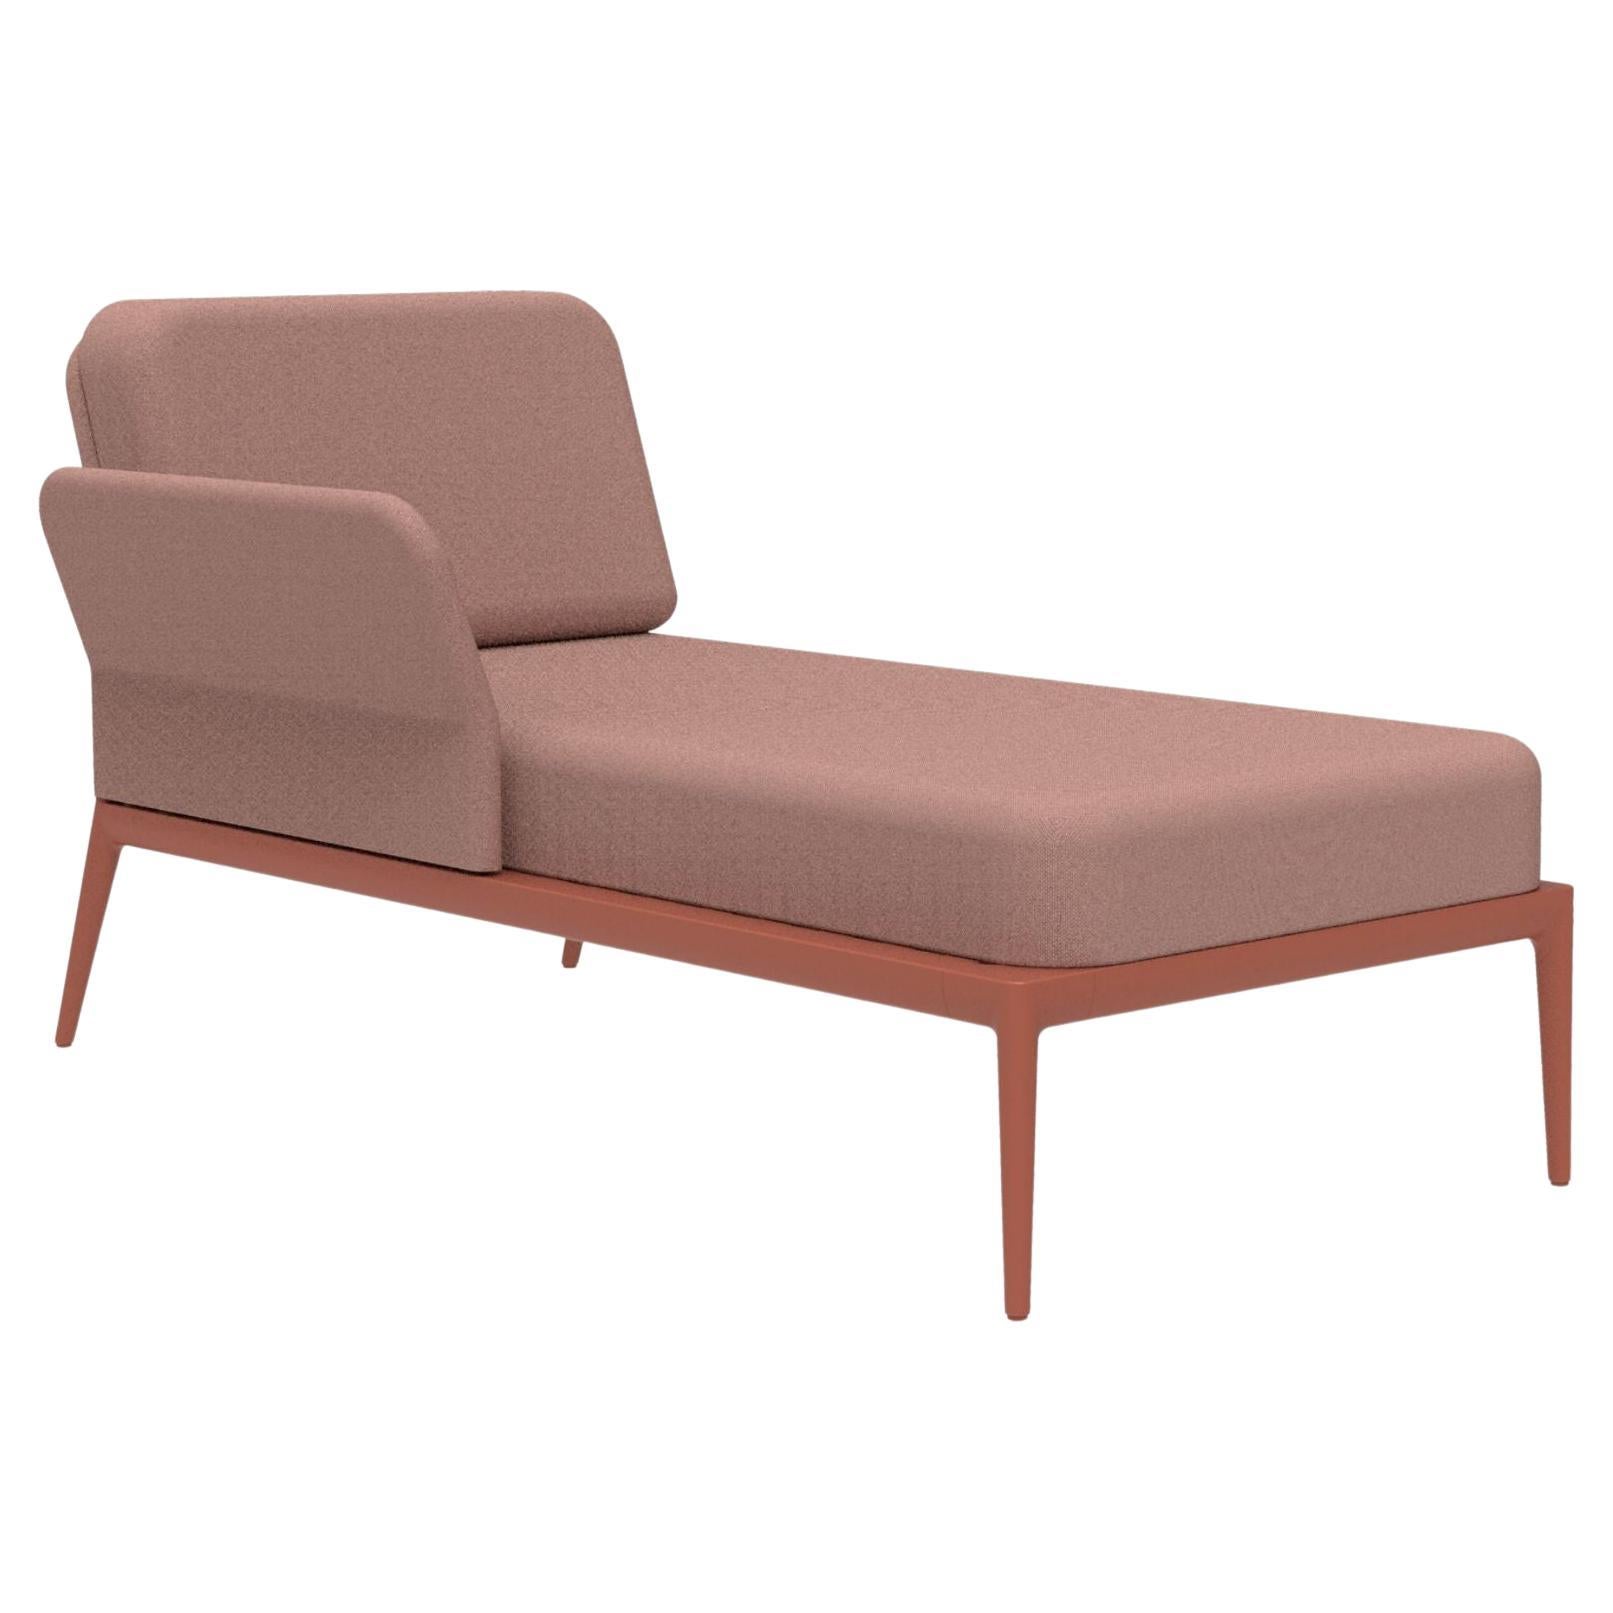 Cover Salmon Right Chaise Lounge by Mowee For Sale